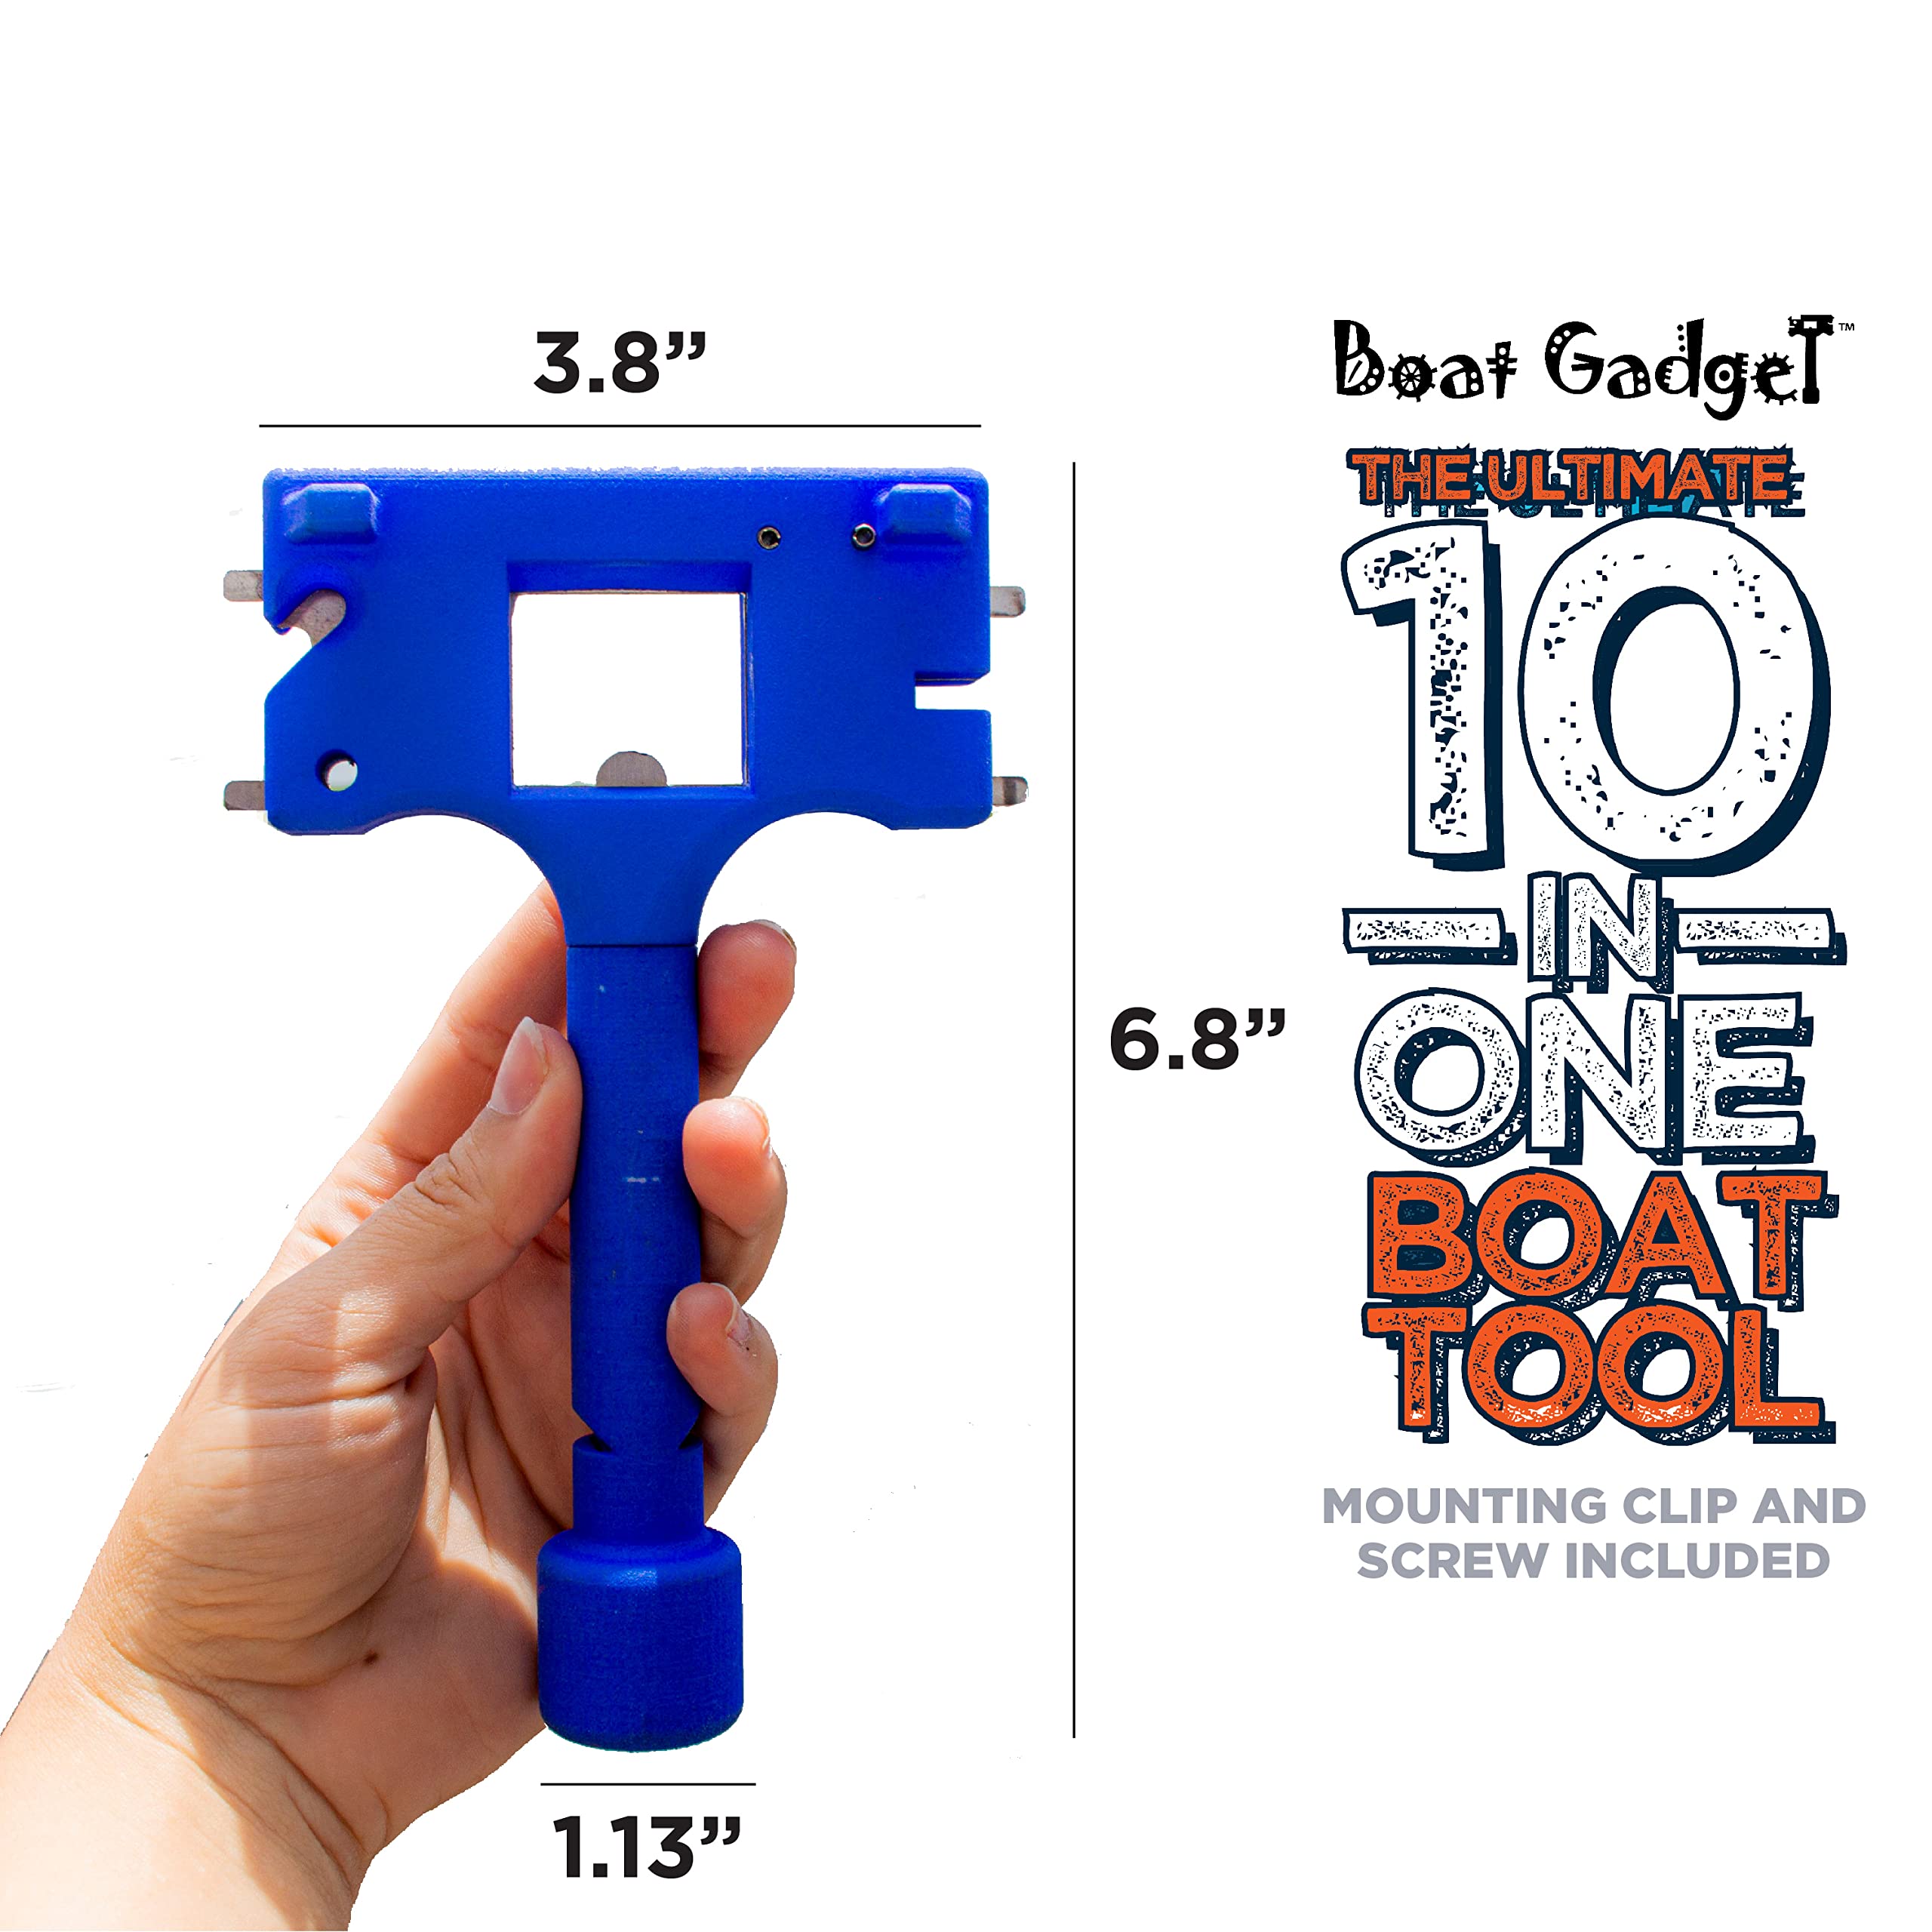 Boat Gadget – This 10-in-1 Boat Tool Includes Beer and Wine Bottle Opener, Safety Whistle, Fishing Line Cutter, Marine Gas Cap Key & Other Essential Tools – Great idea for Boat Owners